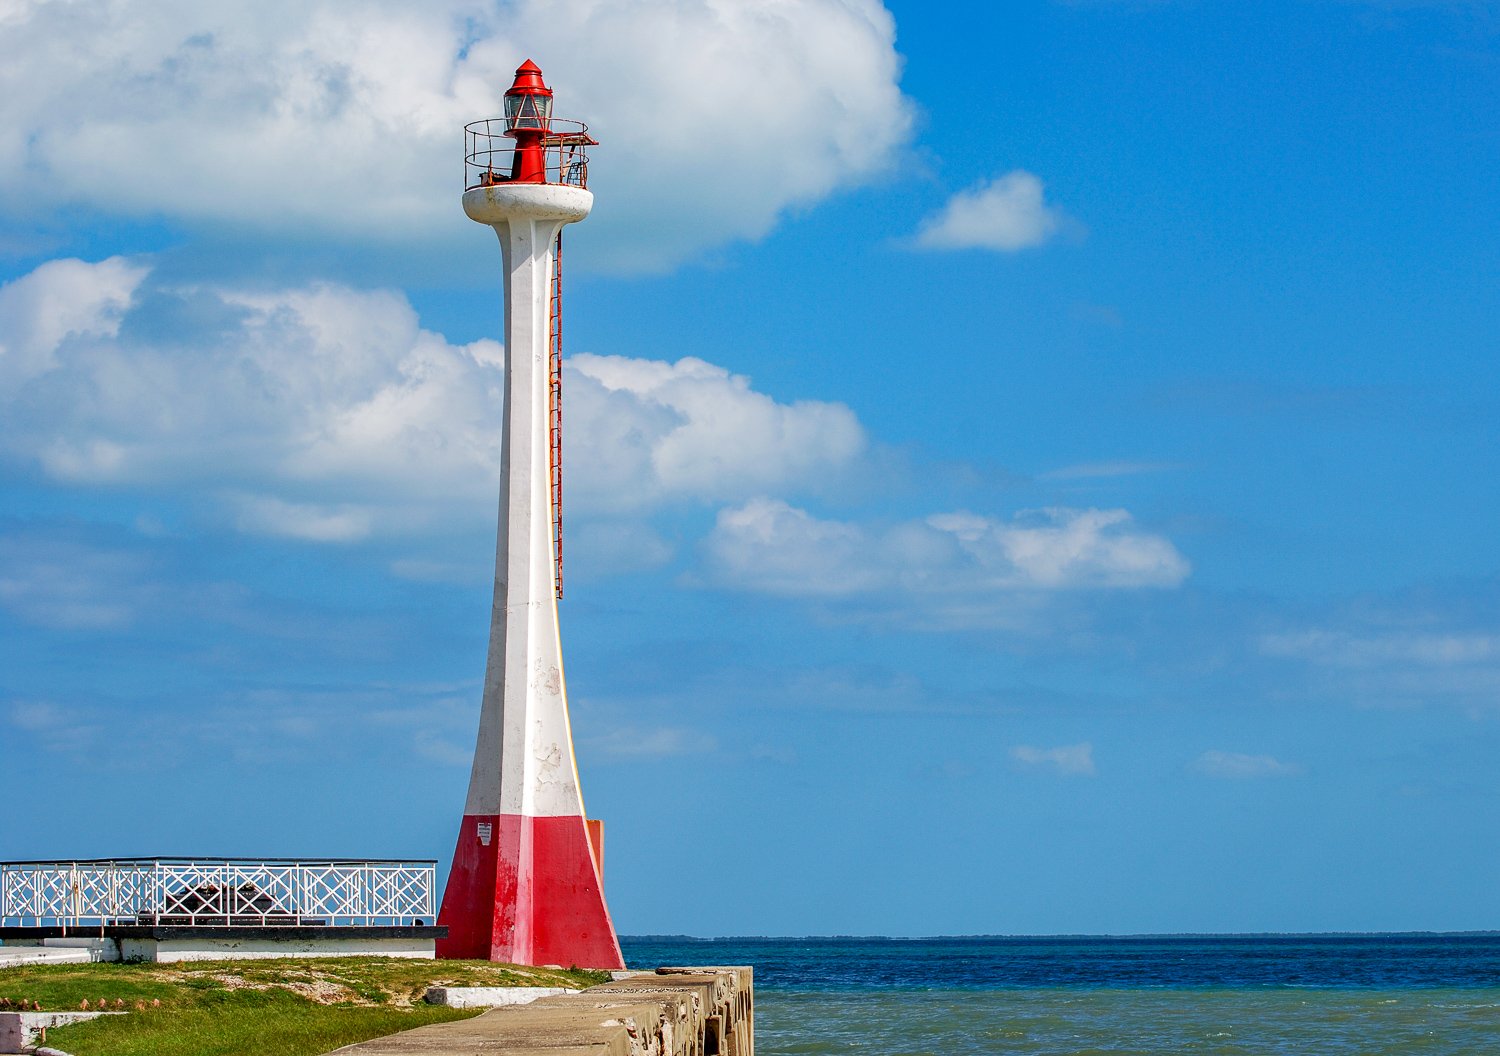 The Lighthouse Of Belize